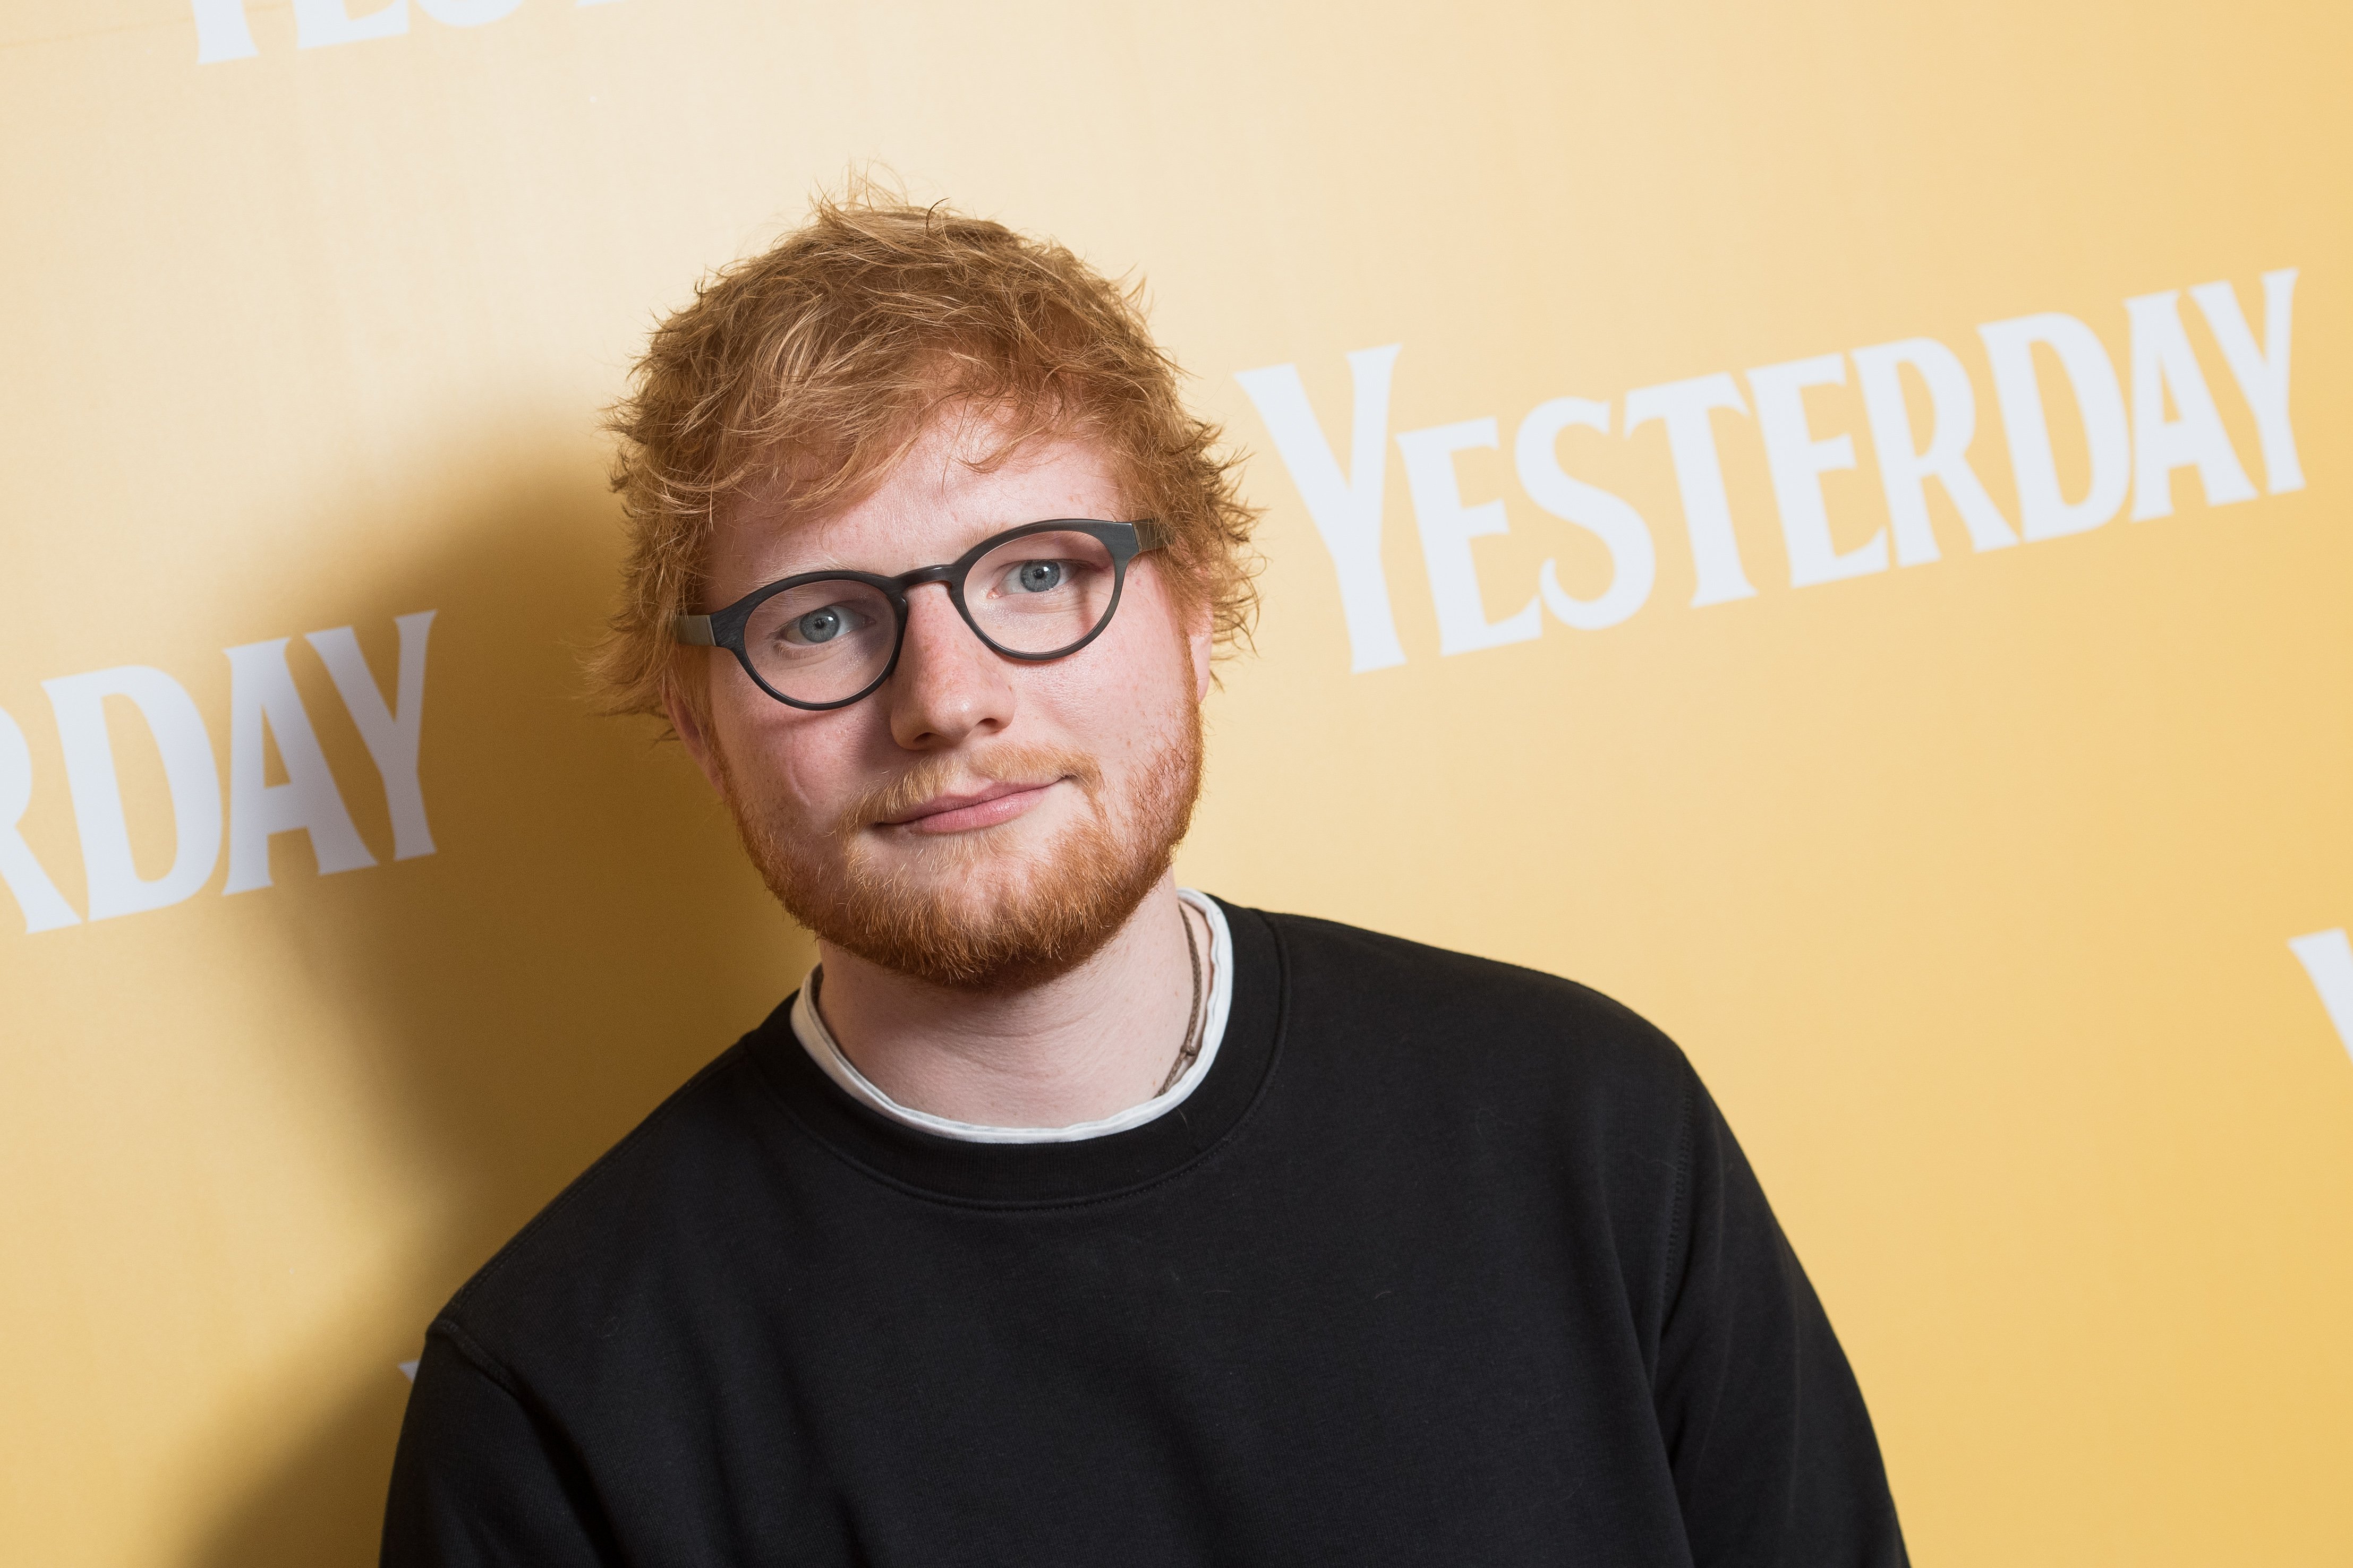 Ed Sheeran attends special screening of Yesterday on June 21, 2019 in Gorleston-on-Sea, England | Photo: Getty Images